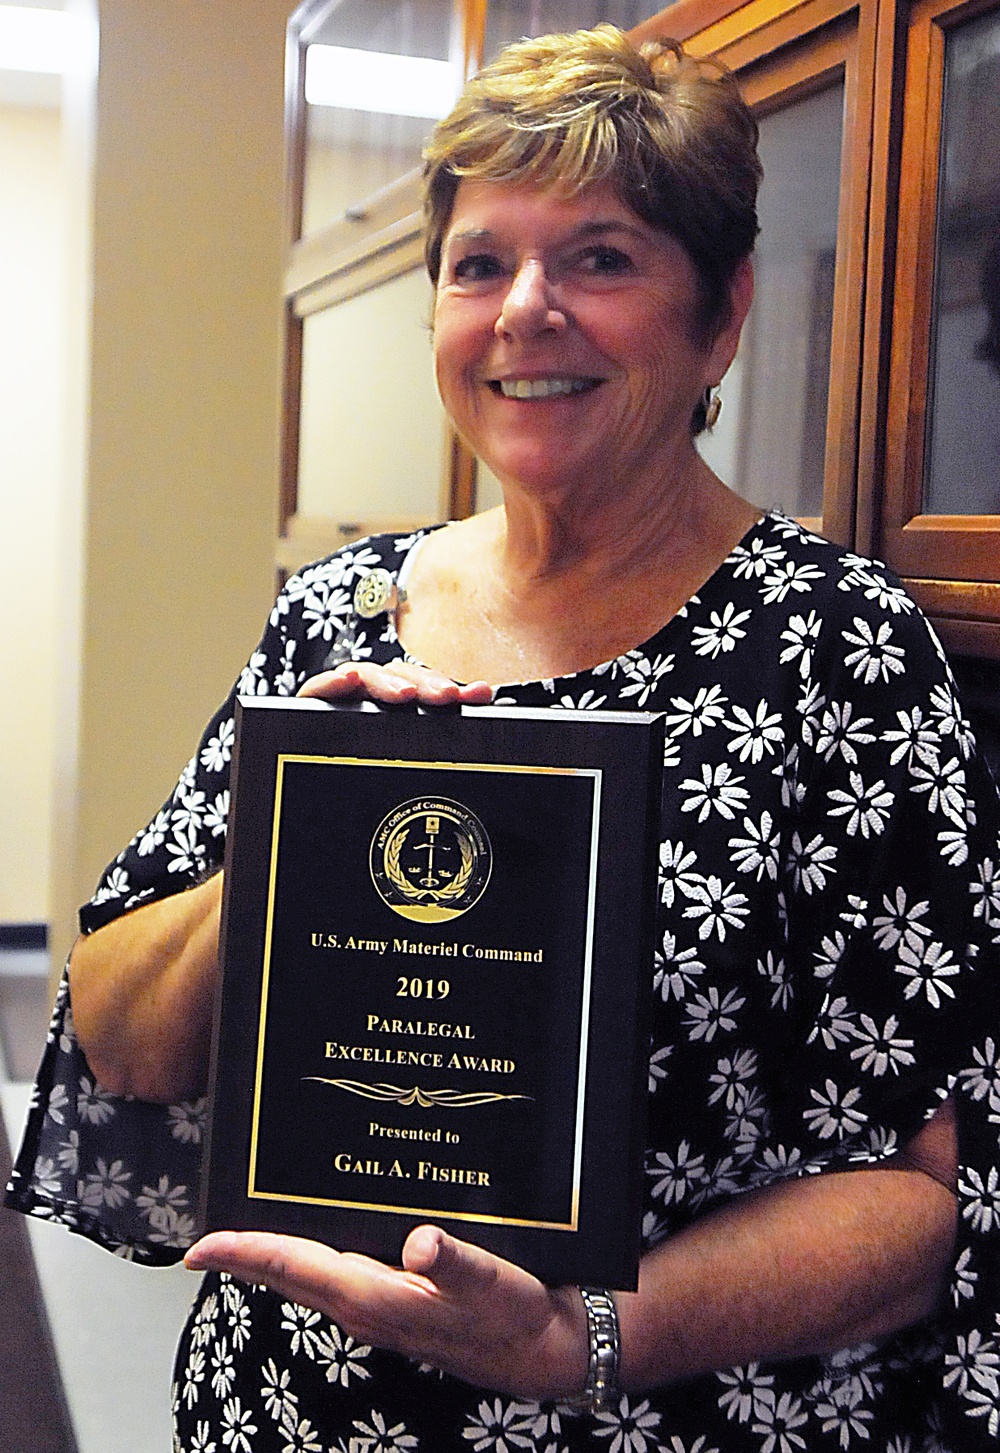 ASC employee brings home AMC Paralegal of the Year Award